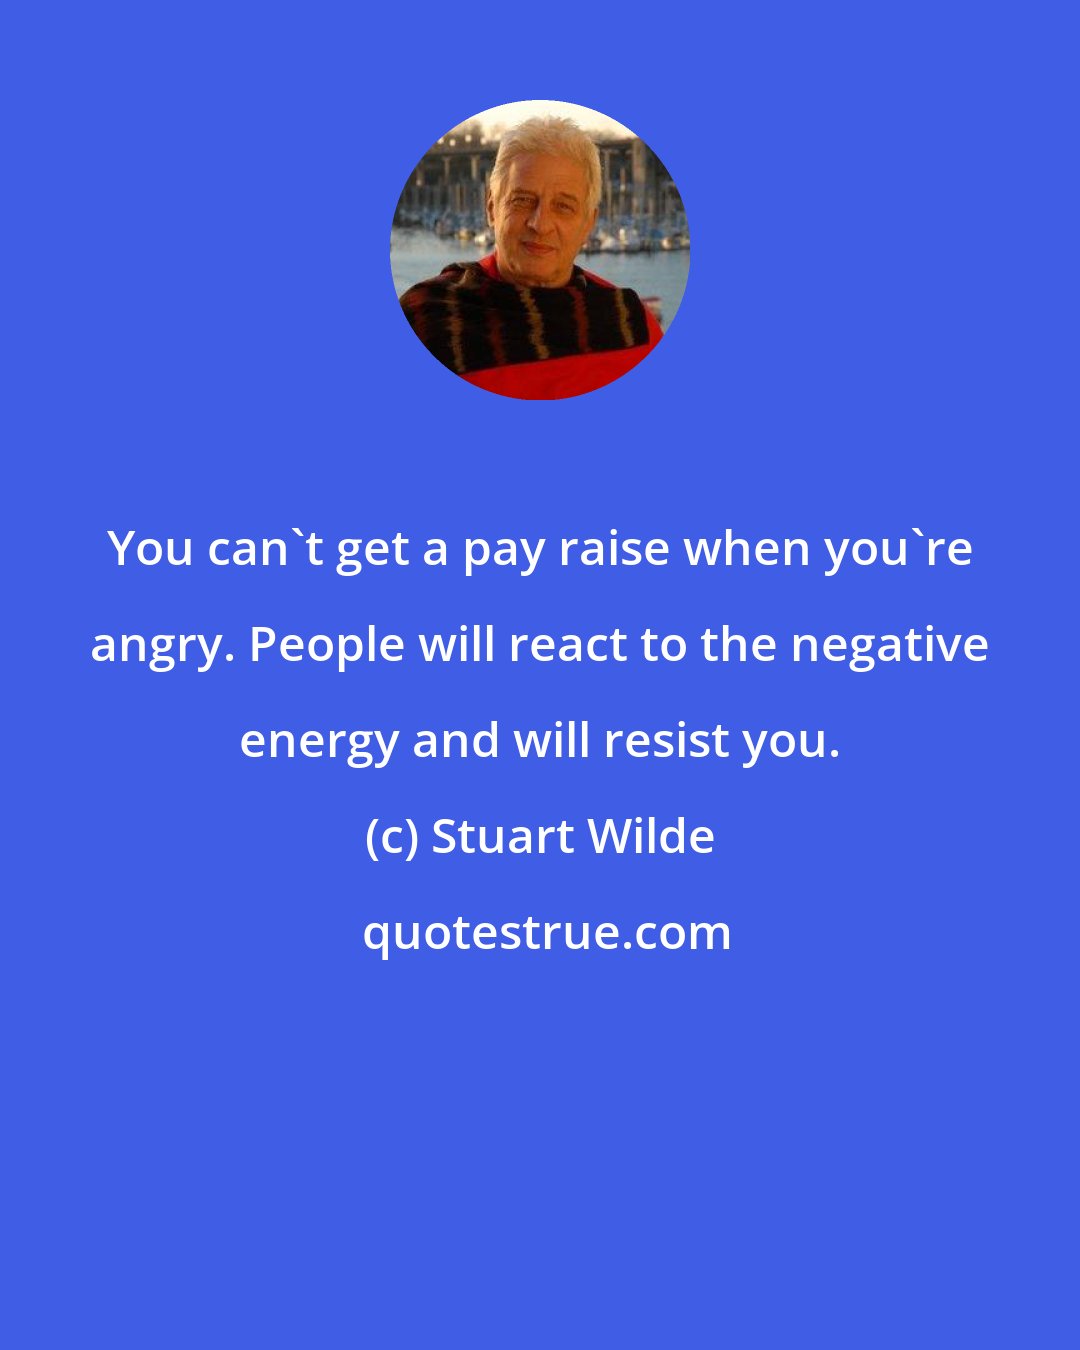 Stuart Wilde: You can't get a pay raise when you're angry. People will react to the negative energy and will resist you.